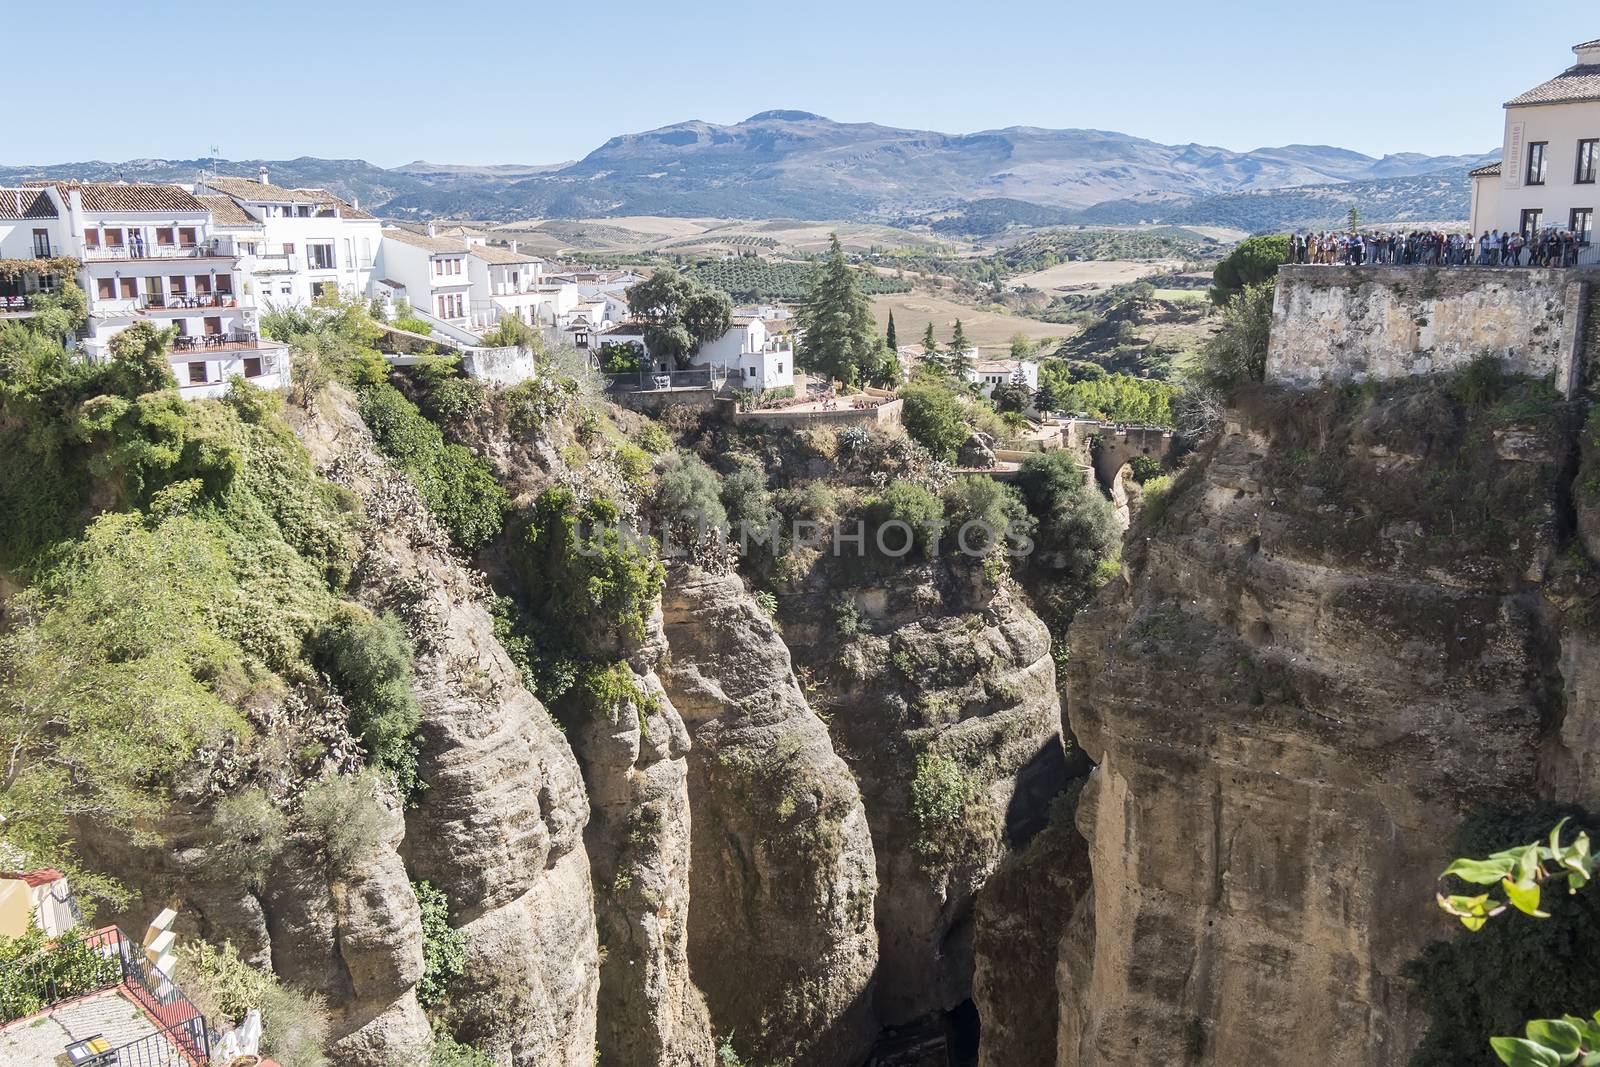 View from the new Bridge over Guadalevin River in Ronda, Malaga, by max8xam